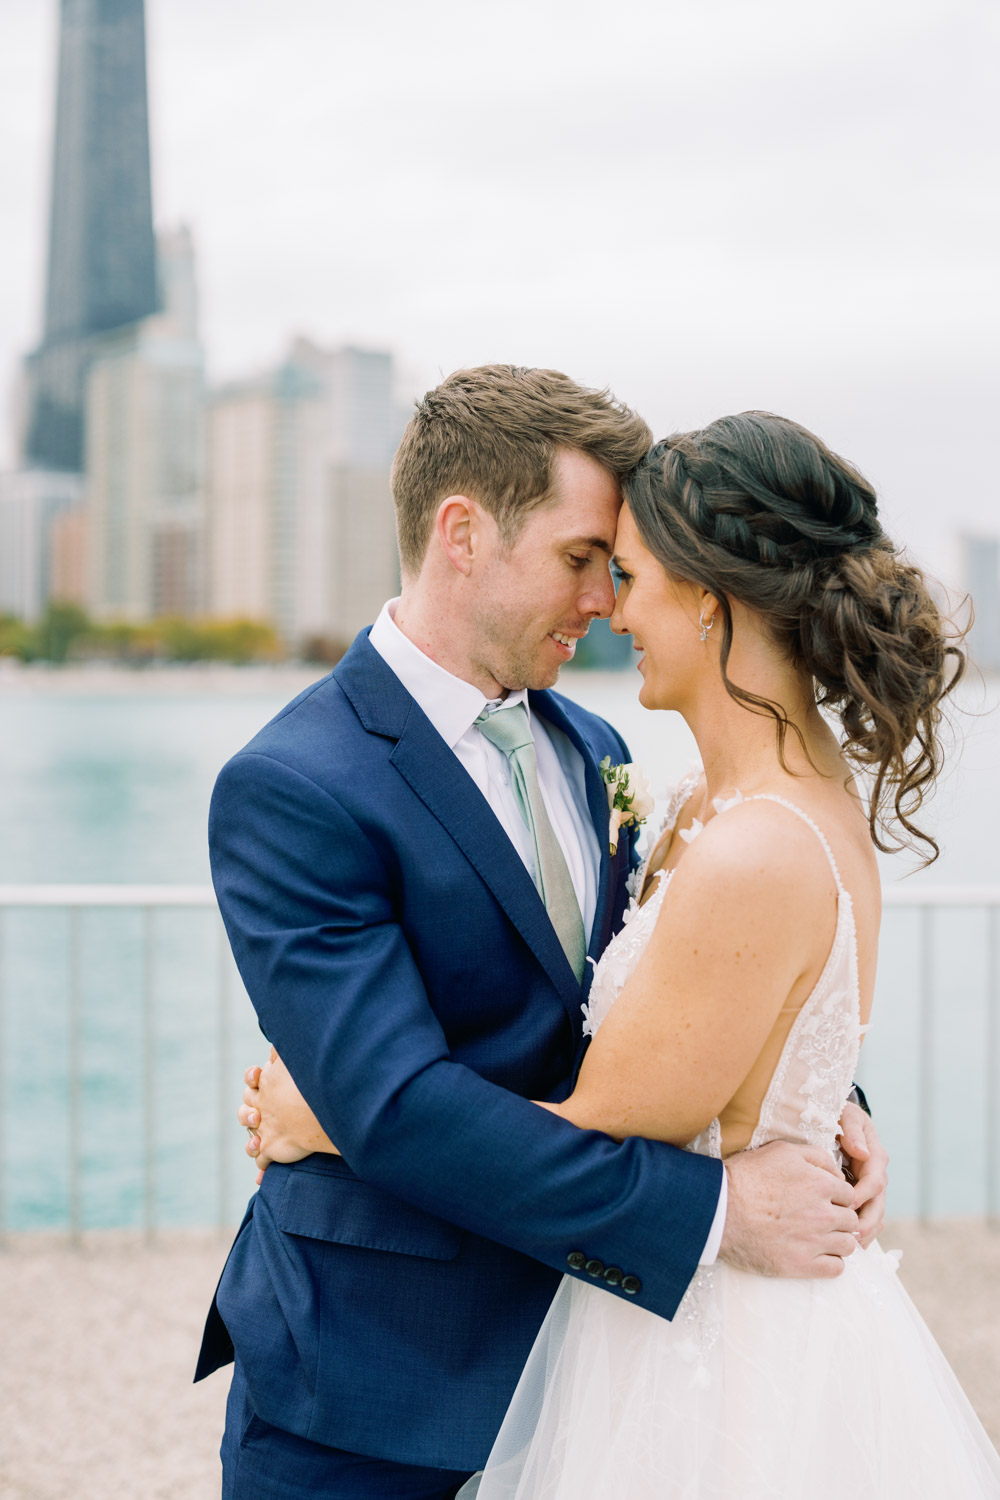 A bride and groom pose in front of the Chicago skyline at Olive Park.